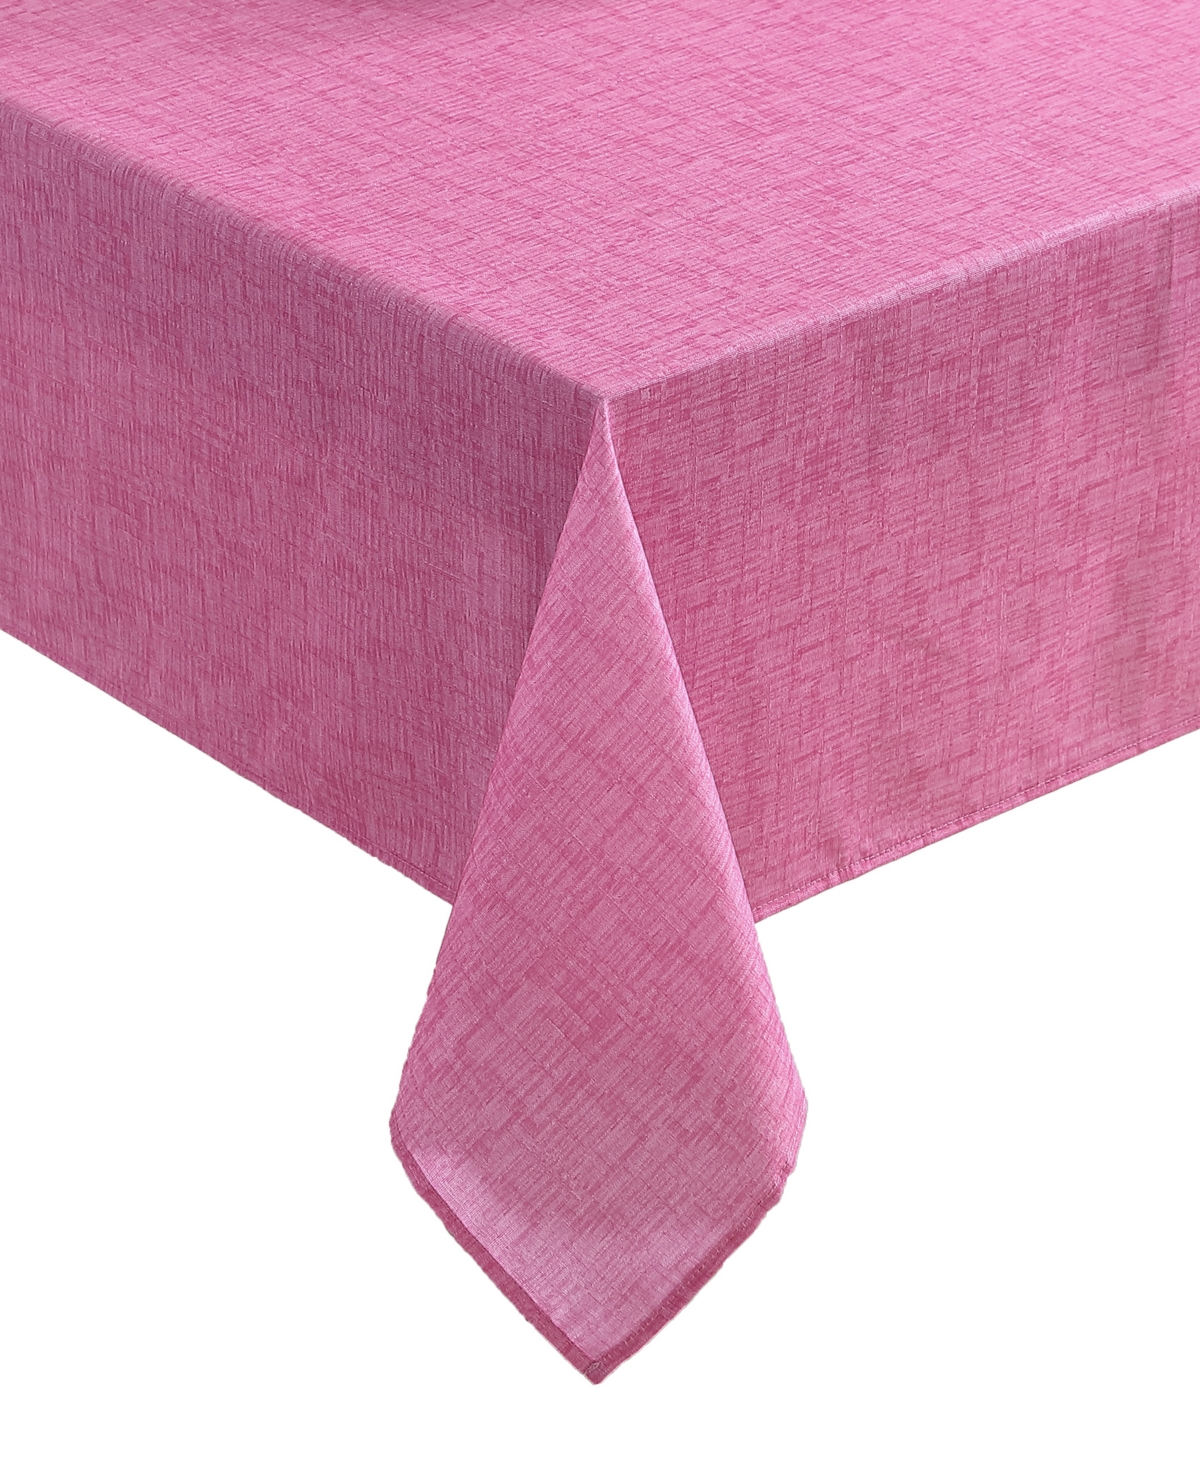 Laura Ashley Easy Care Tablecloth, 60" X 102", Service For 6 In Magenta